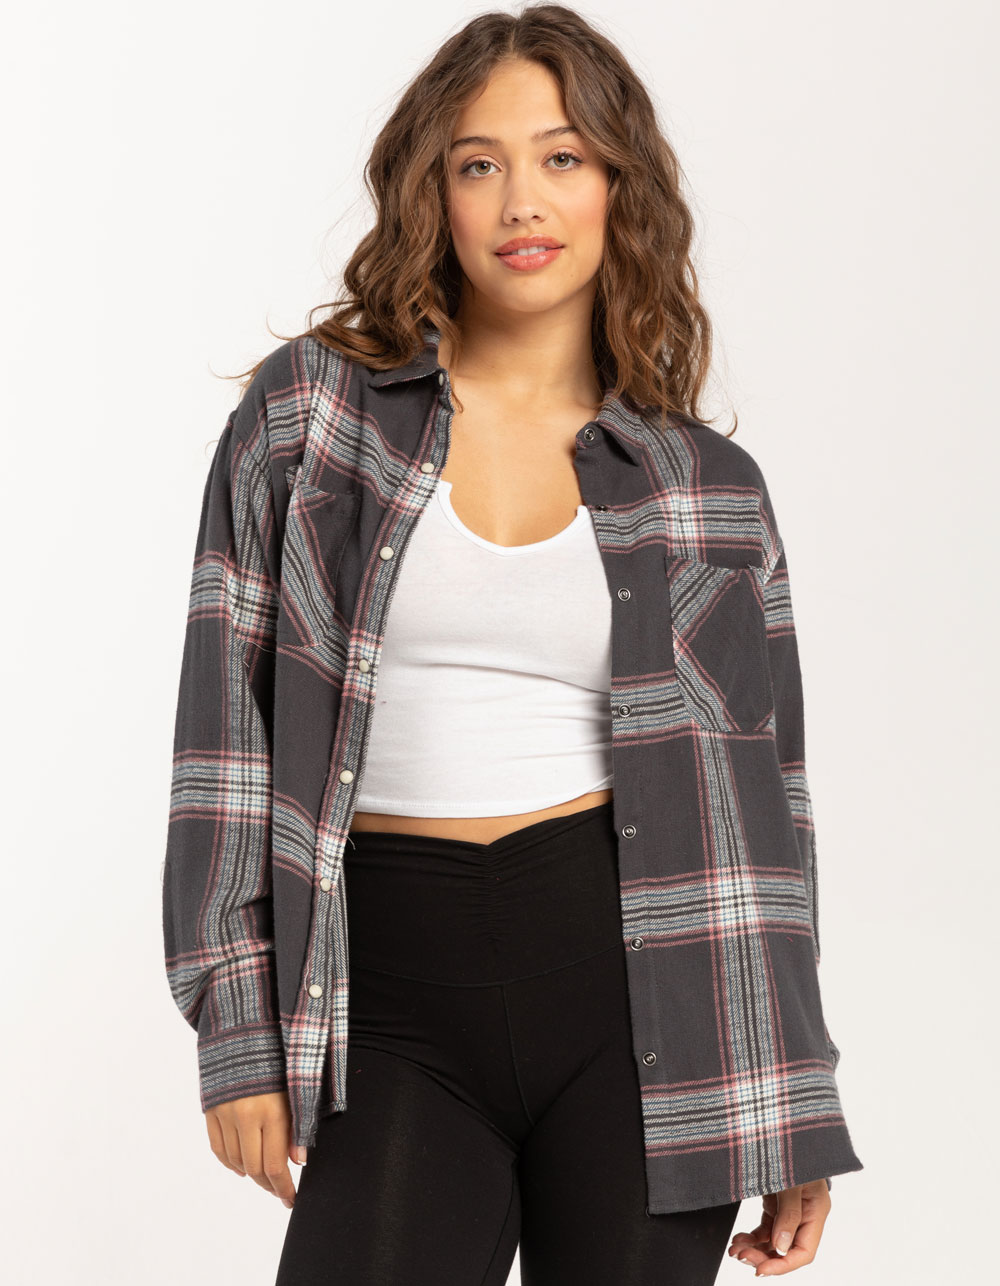 nike sports bra & flannel  Plaid shirt outfits, Pretty outfits, Flannel  outfits